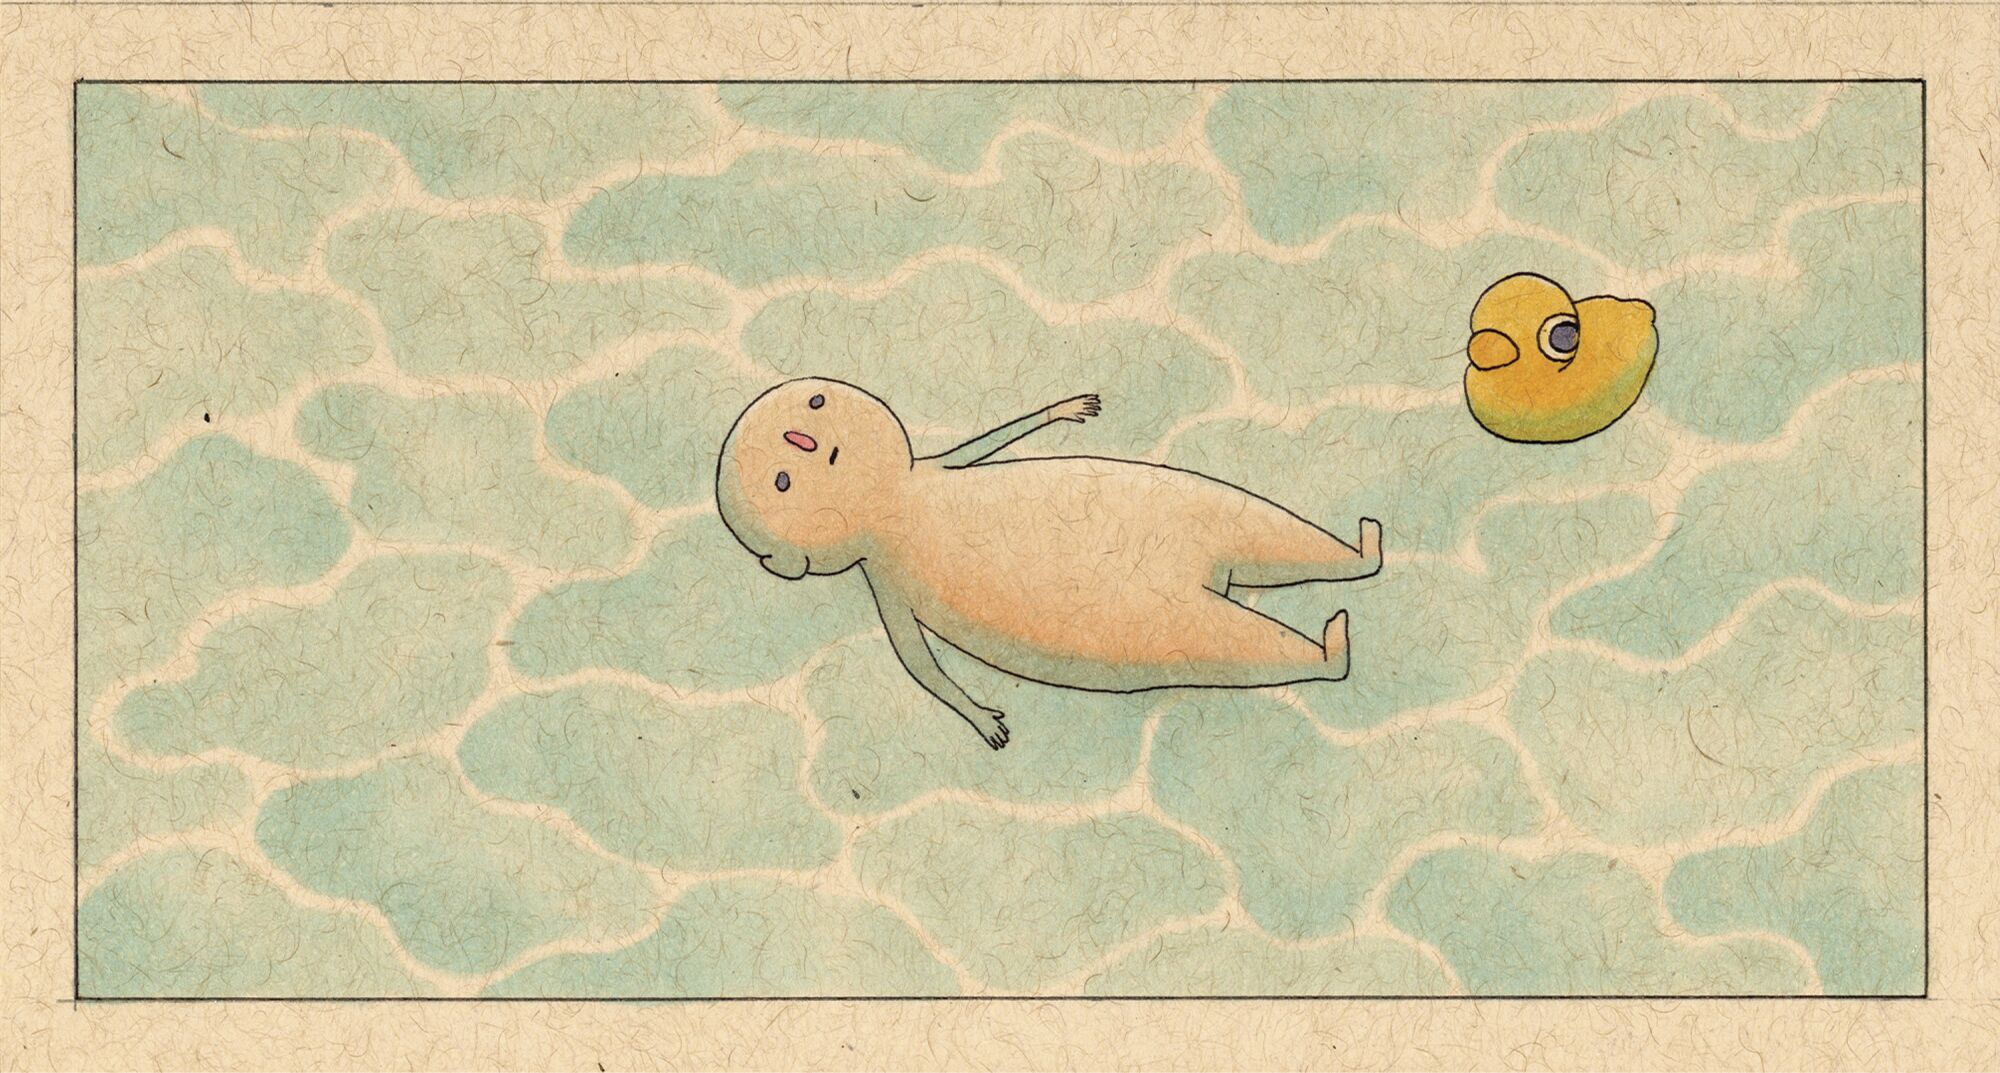 Illustration of a child lying on a blue-patterned surface next to a rubber duck